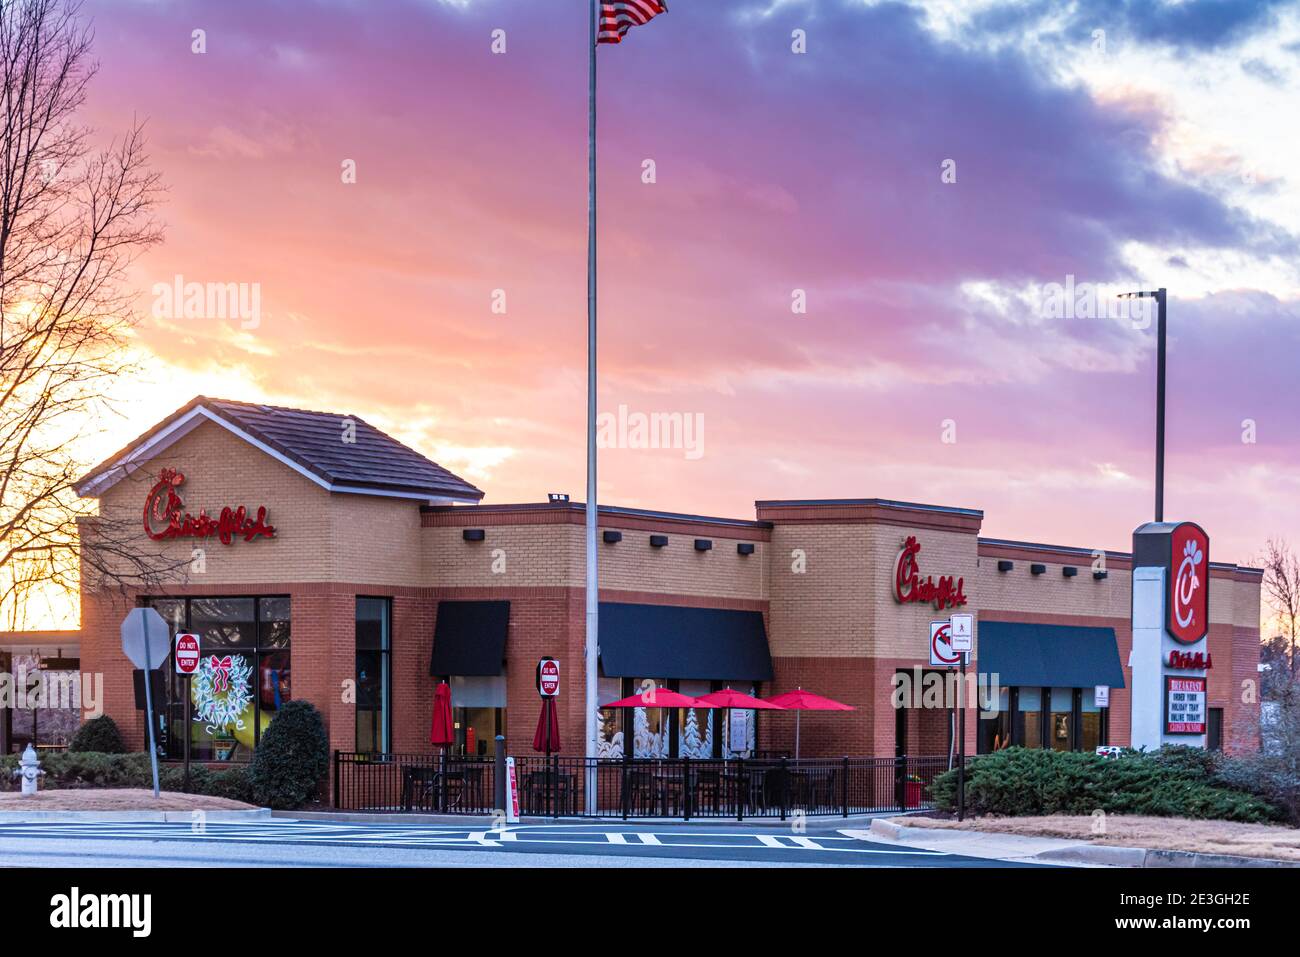 Chick-fil-A at sunset in Snellville, Georgia. The restaurant, normally swamped with customers, is shown on Sunday when Chick-fil-A is closed. (USA) Stock Photo